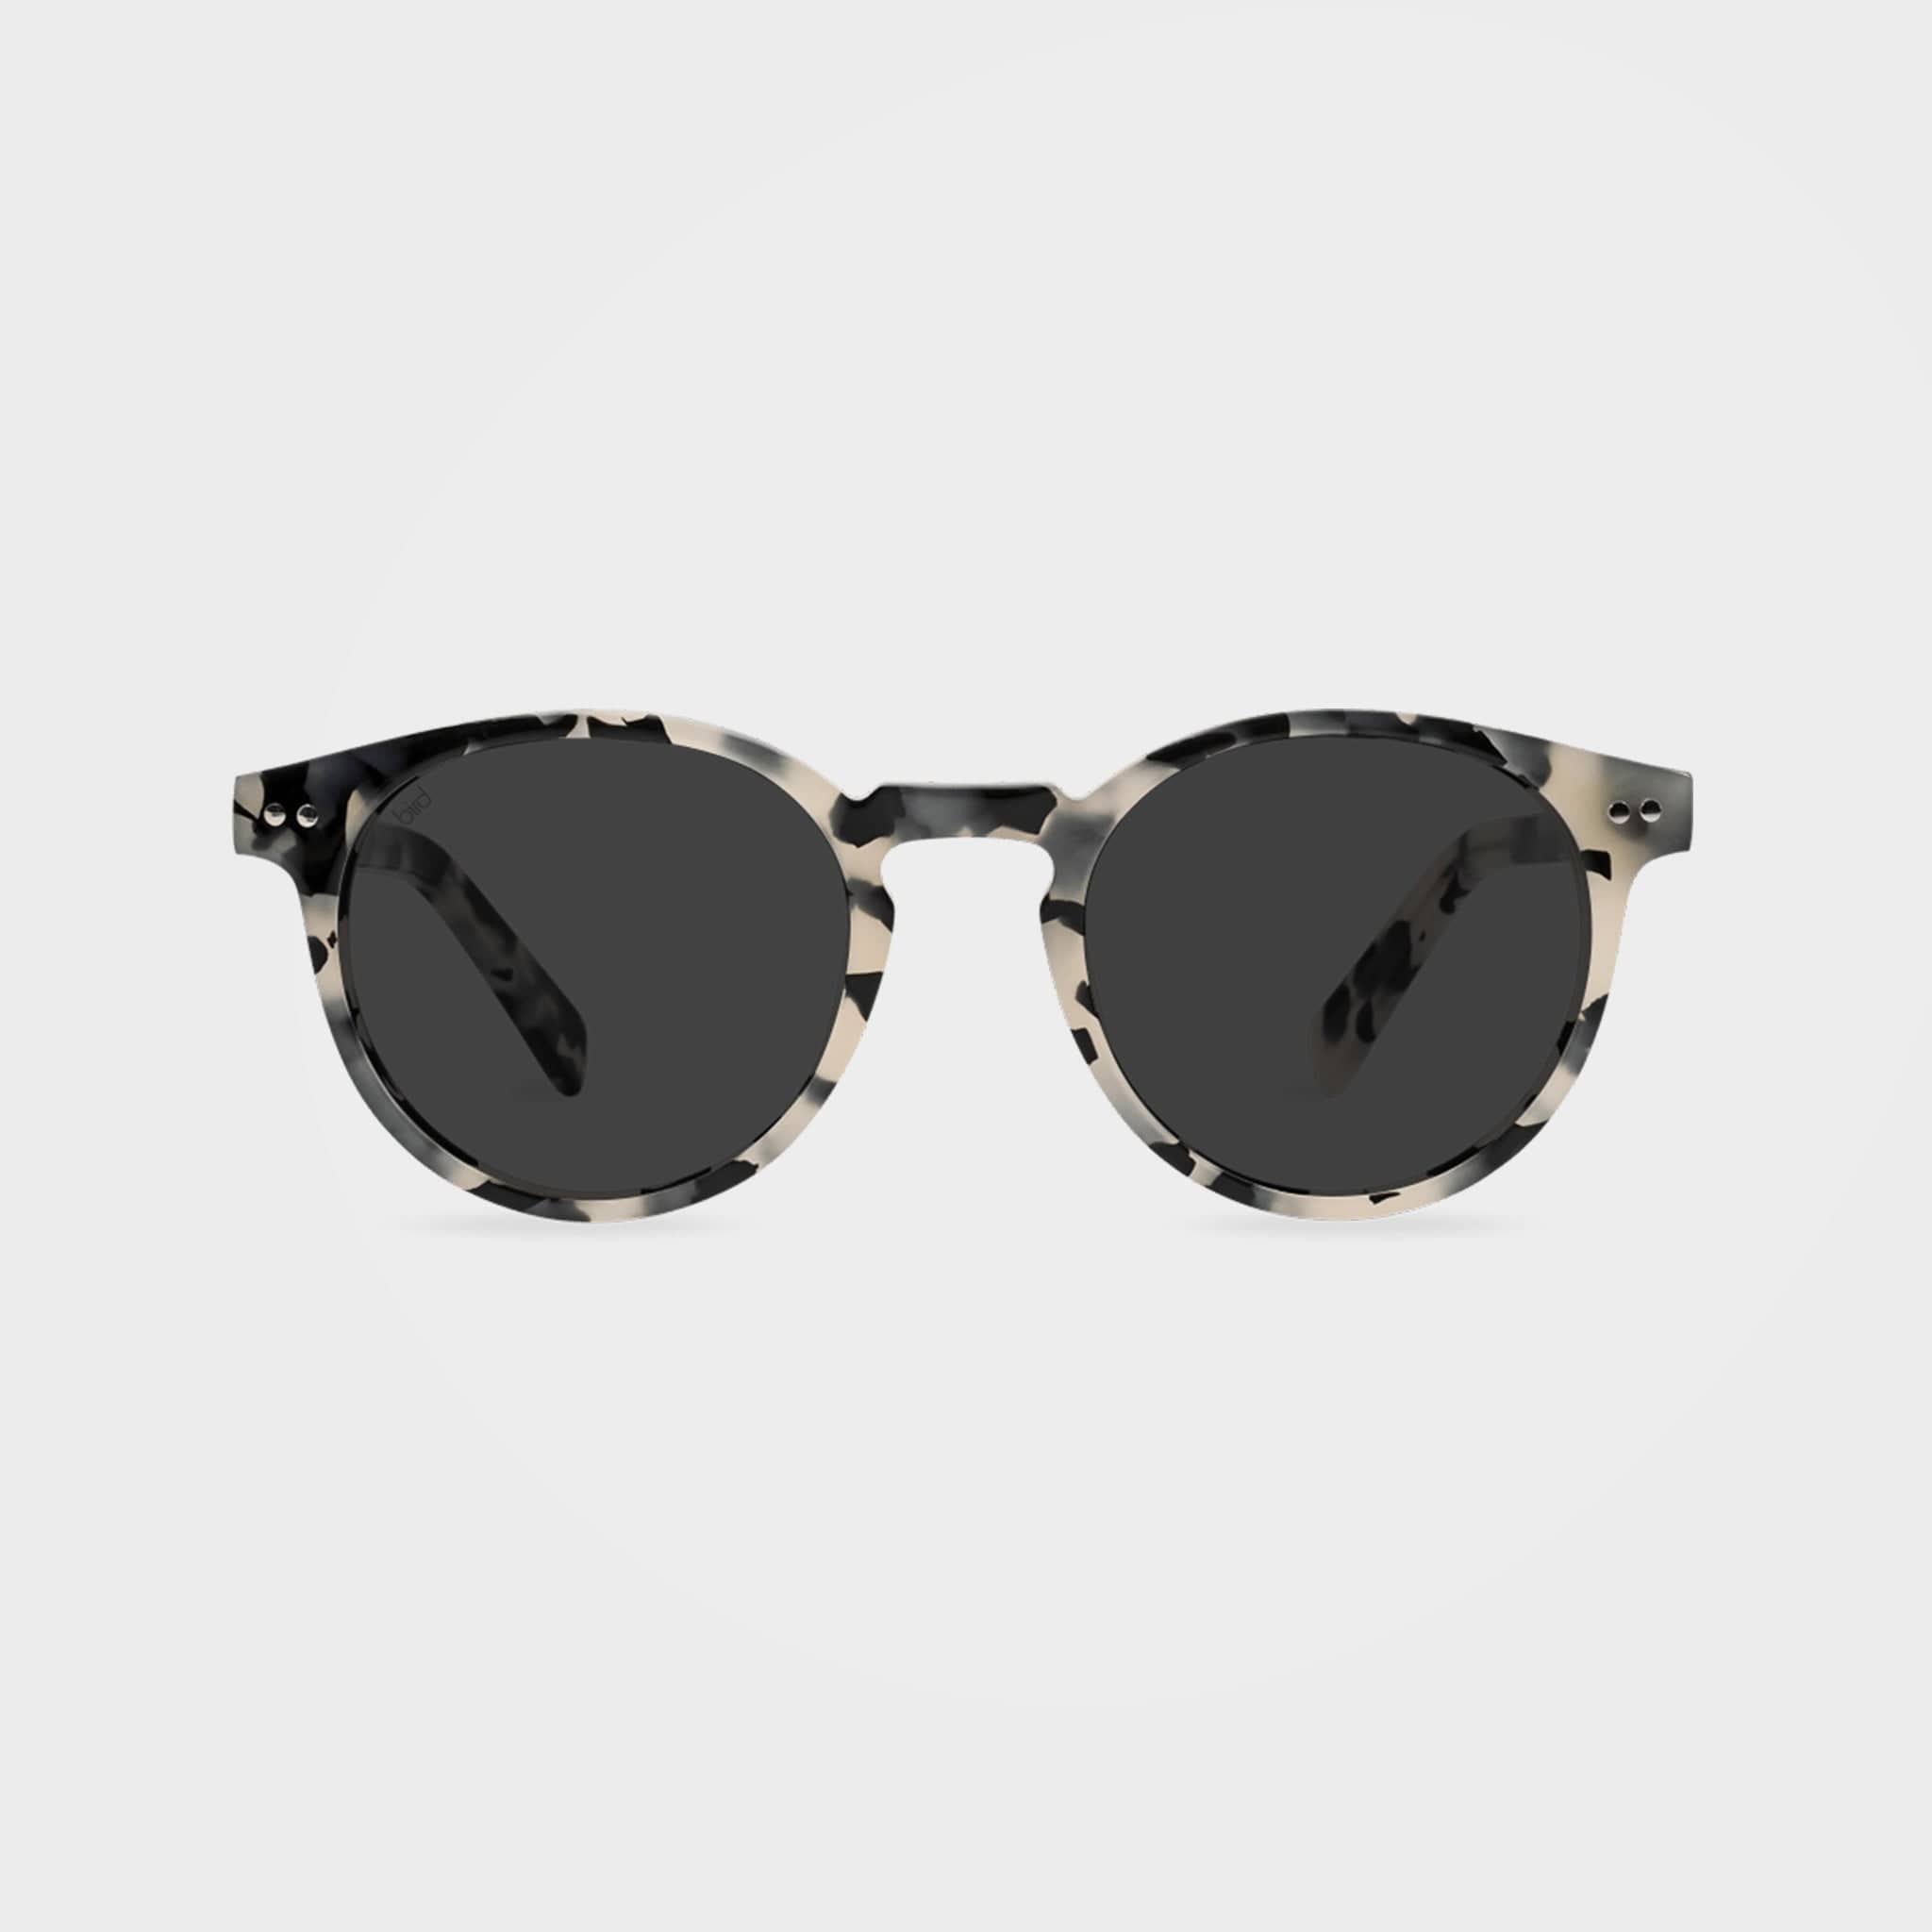 Best sunglasses for oval-shaped face